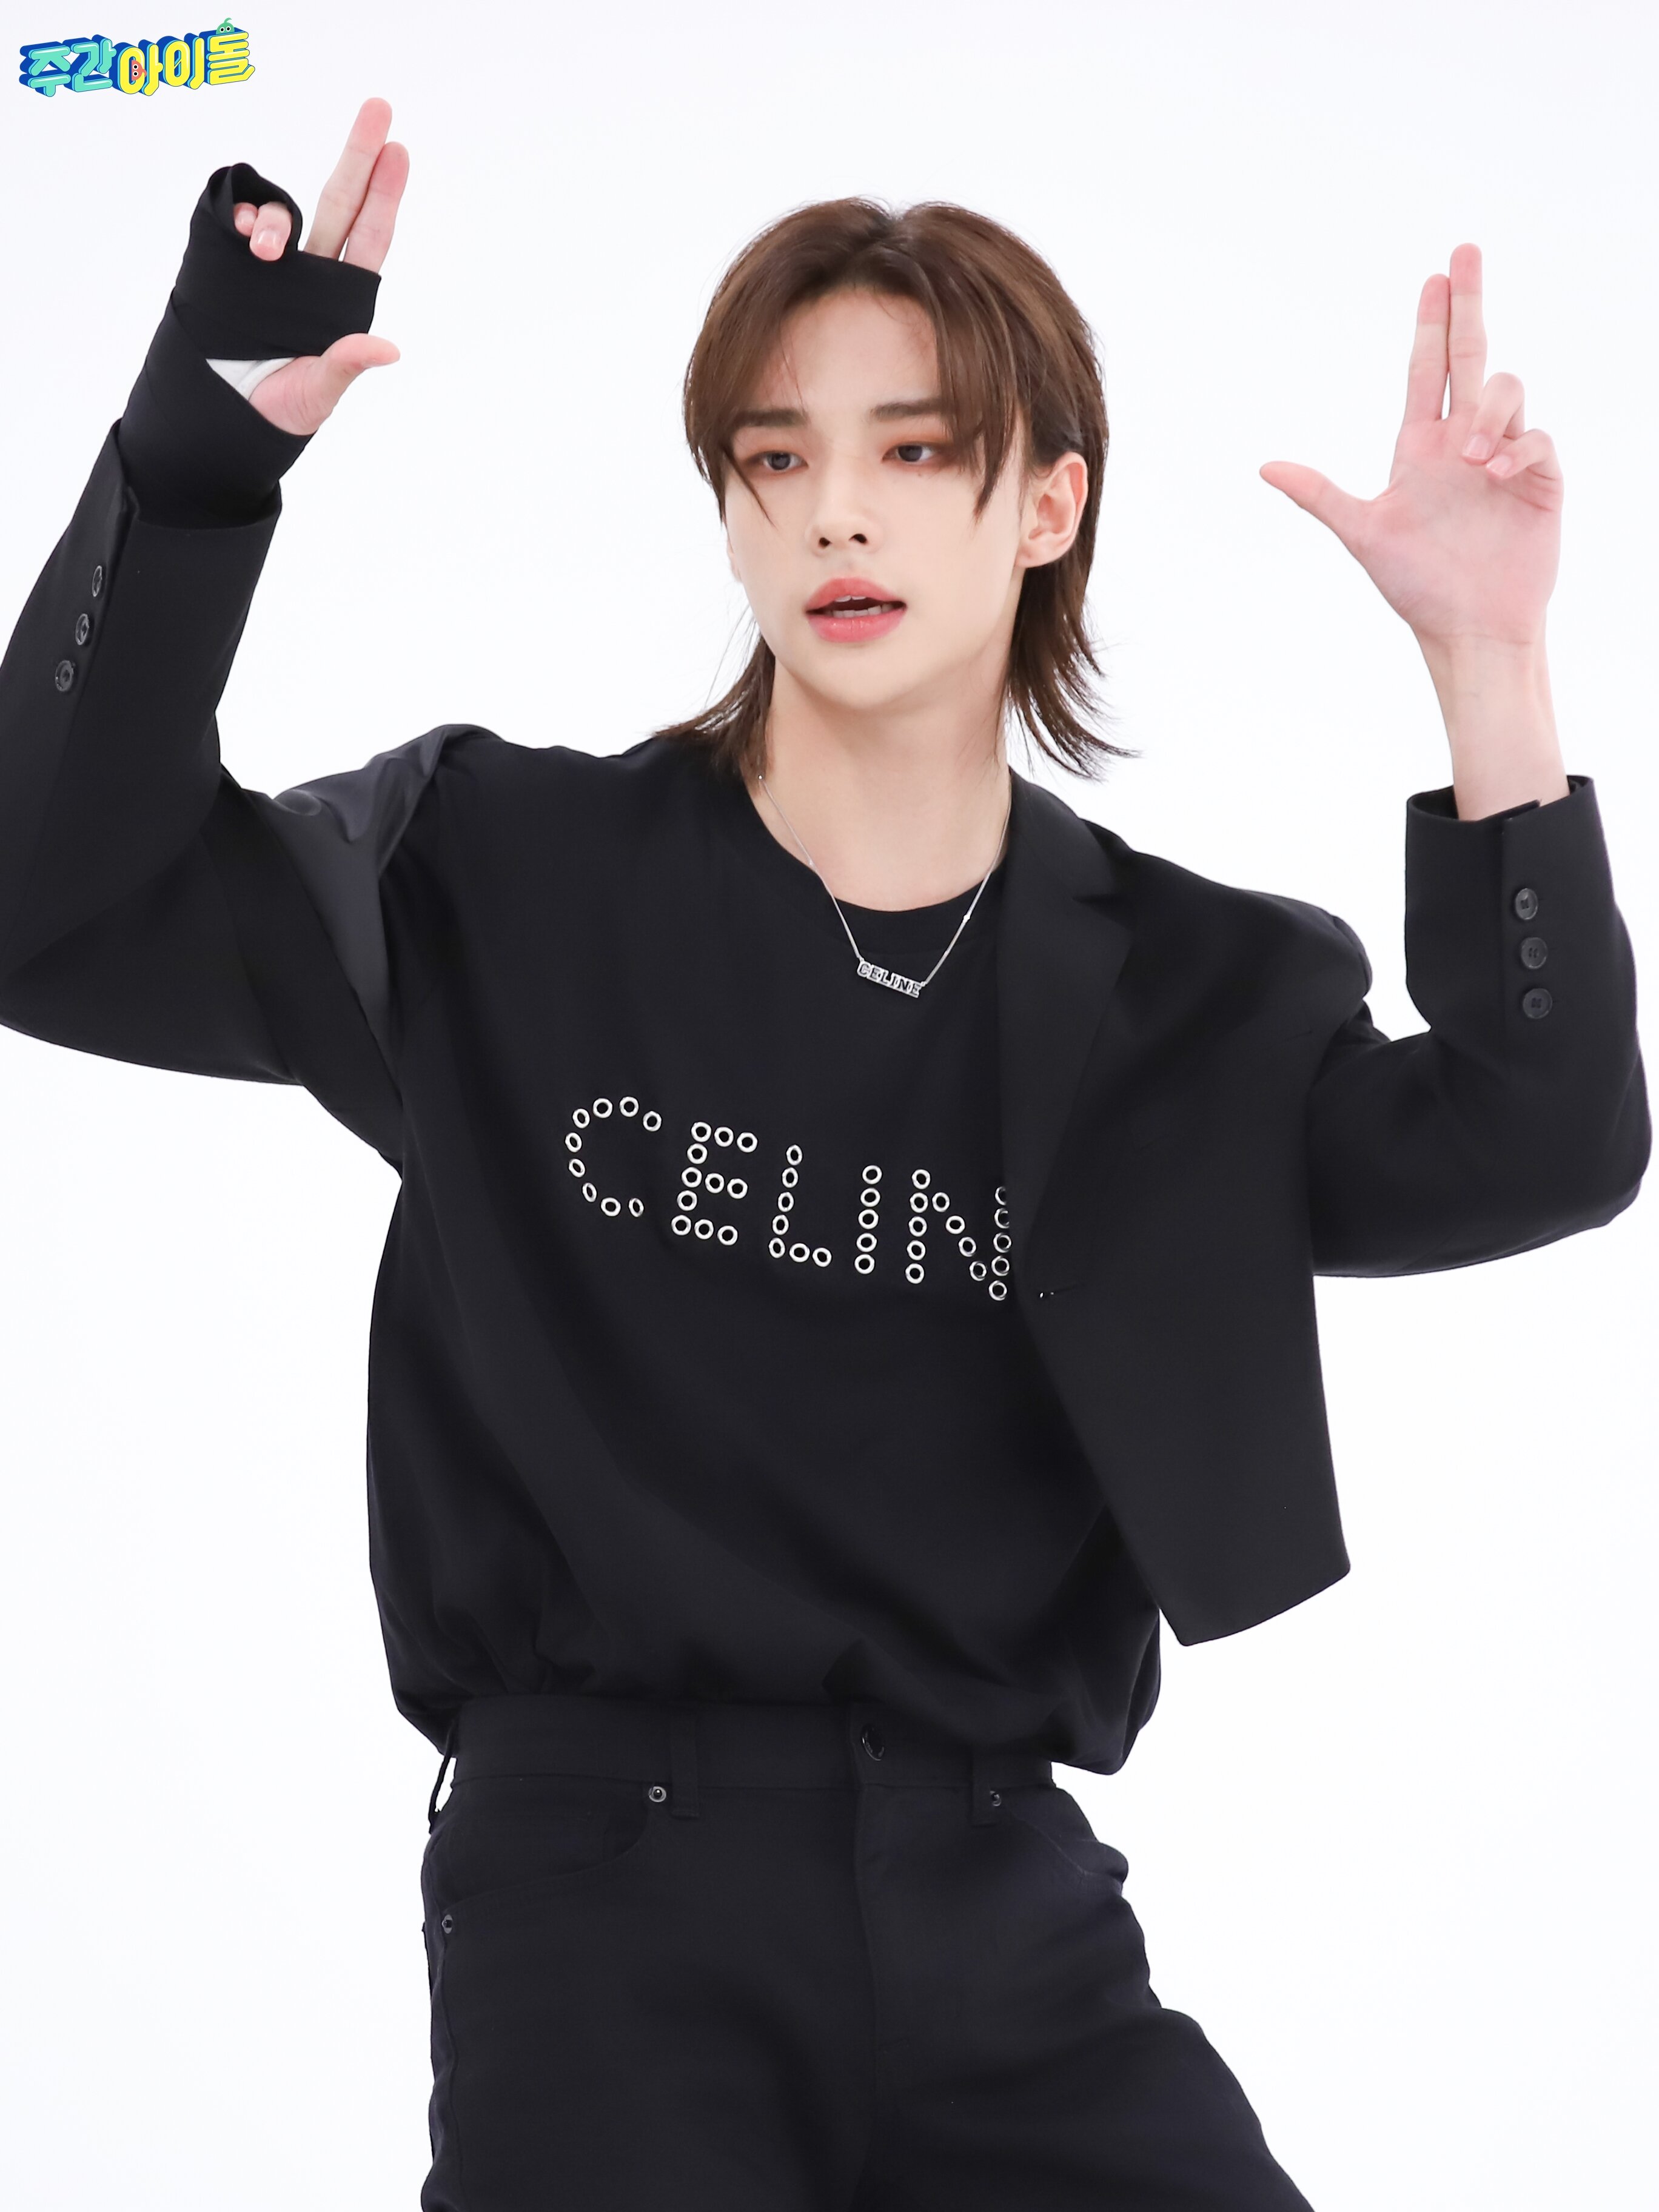 Stray Kids' Hyunjin To Be Absent From “Music Core” This Week +